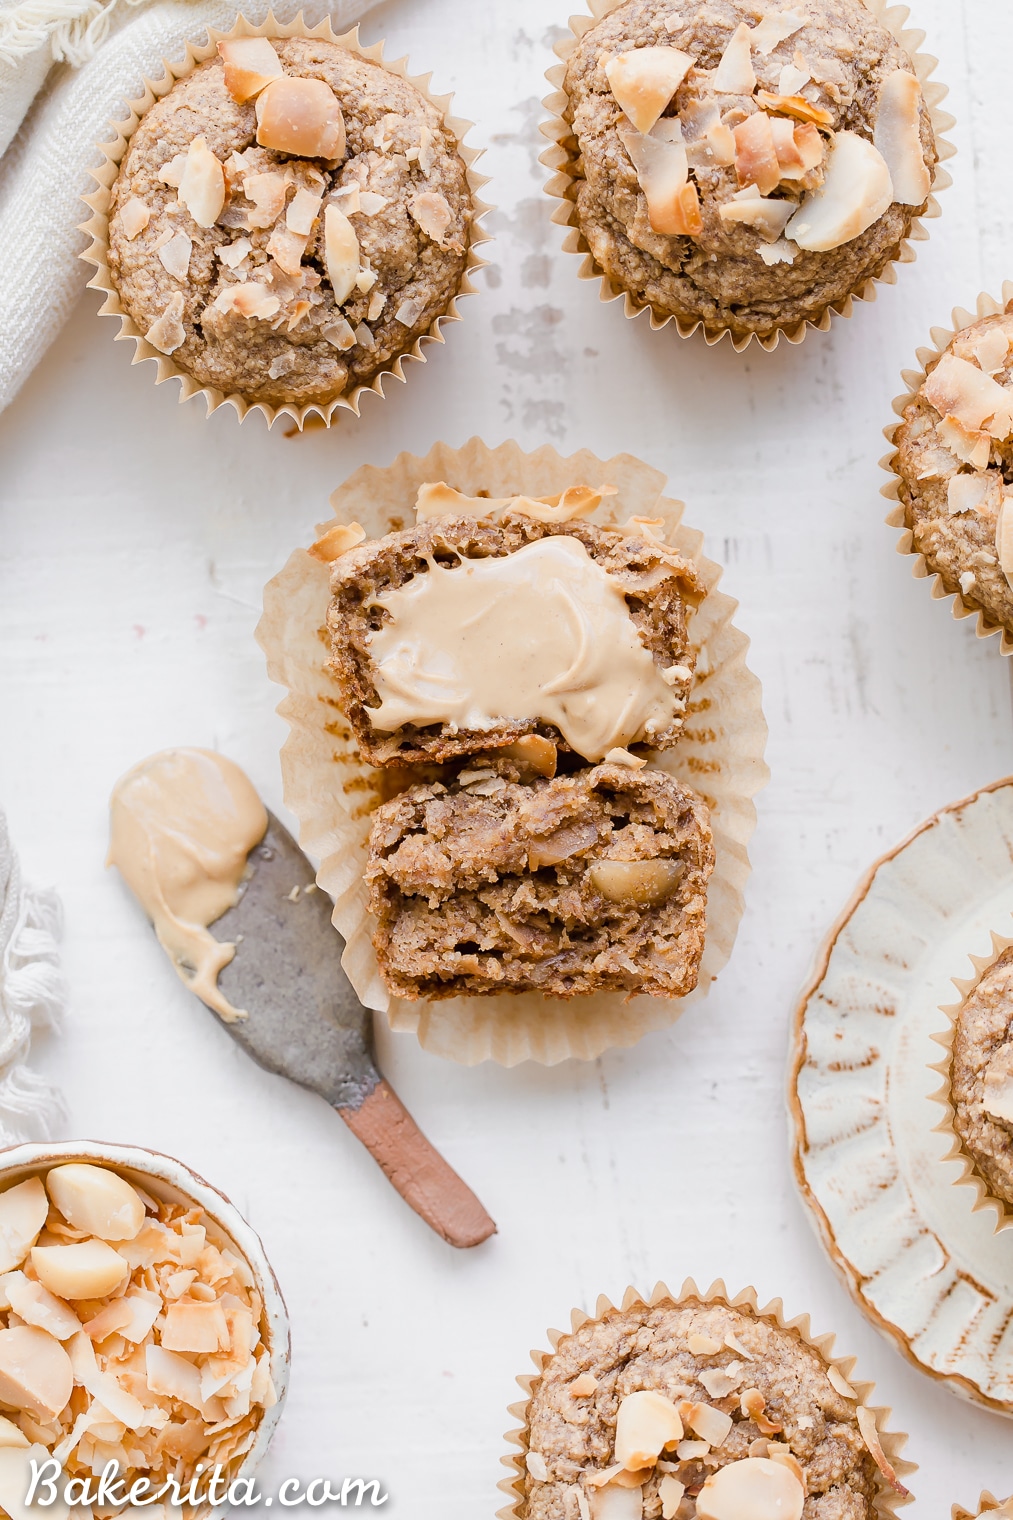 These Macadamia Nut Coconut Banana Muffins are tender, moist, and perfectly sweet for breakfast. Slathered with a little jam or nut butter, these gluten-free and vegan banana muffins make a wonderful snack or breakfast that will keep you satiated for hours.